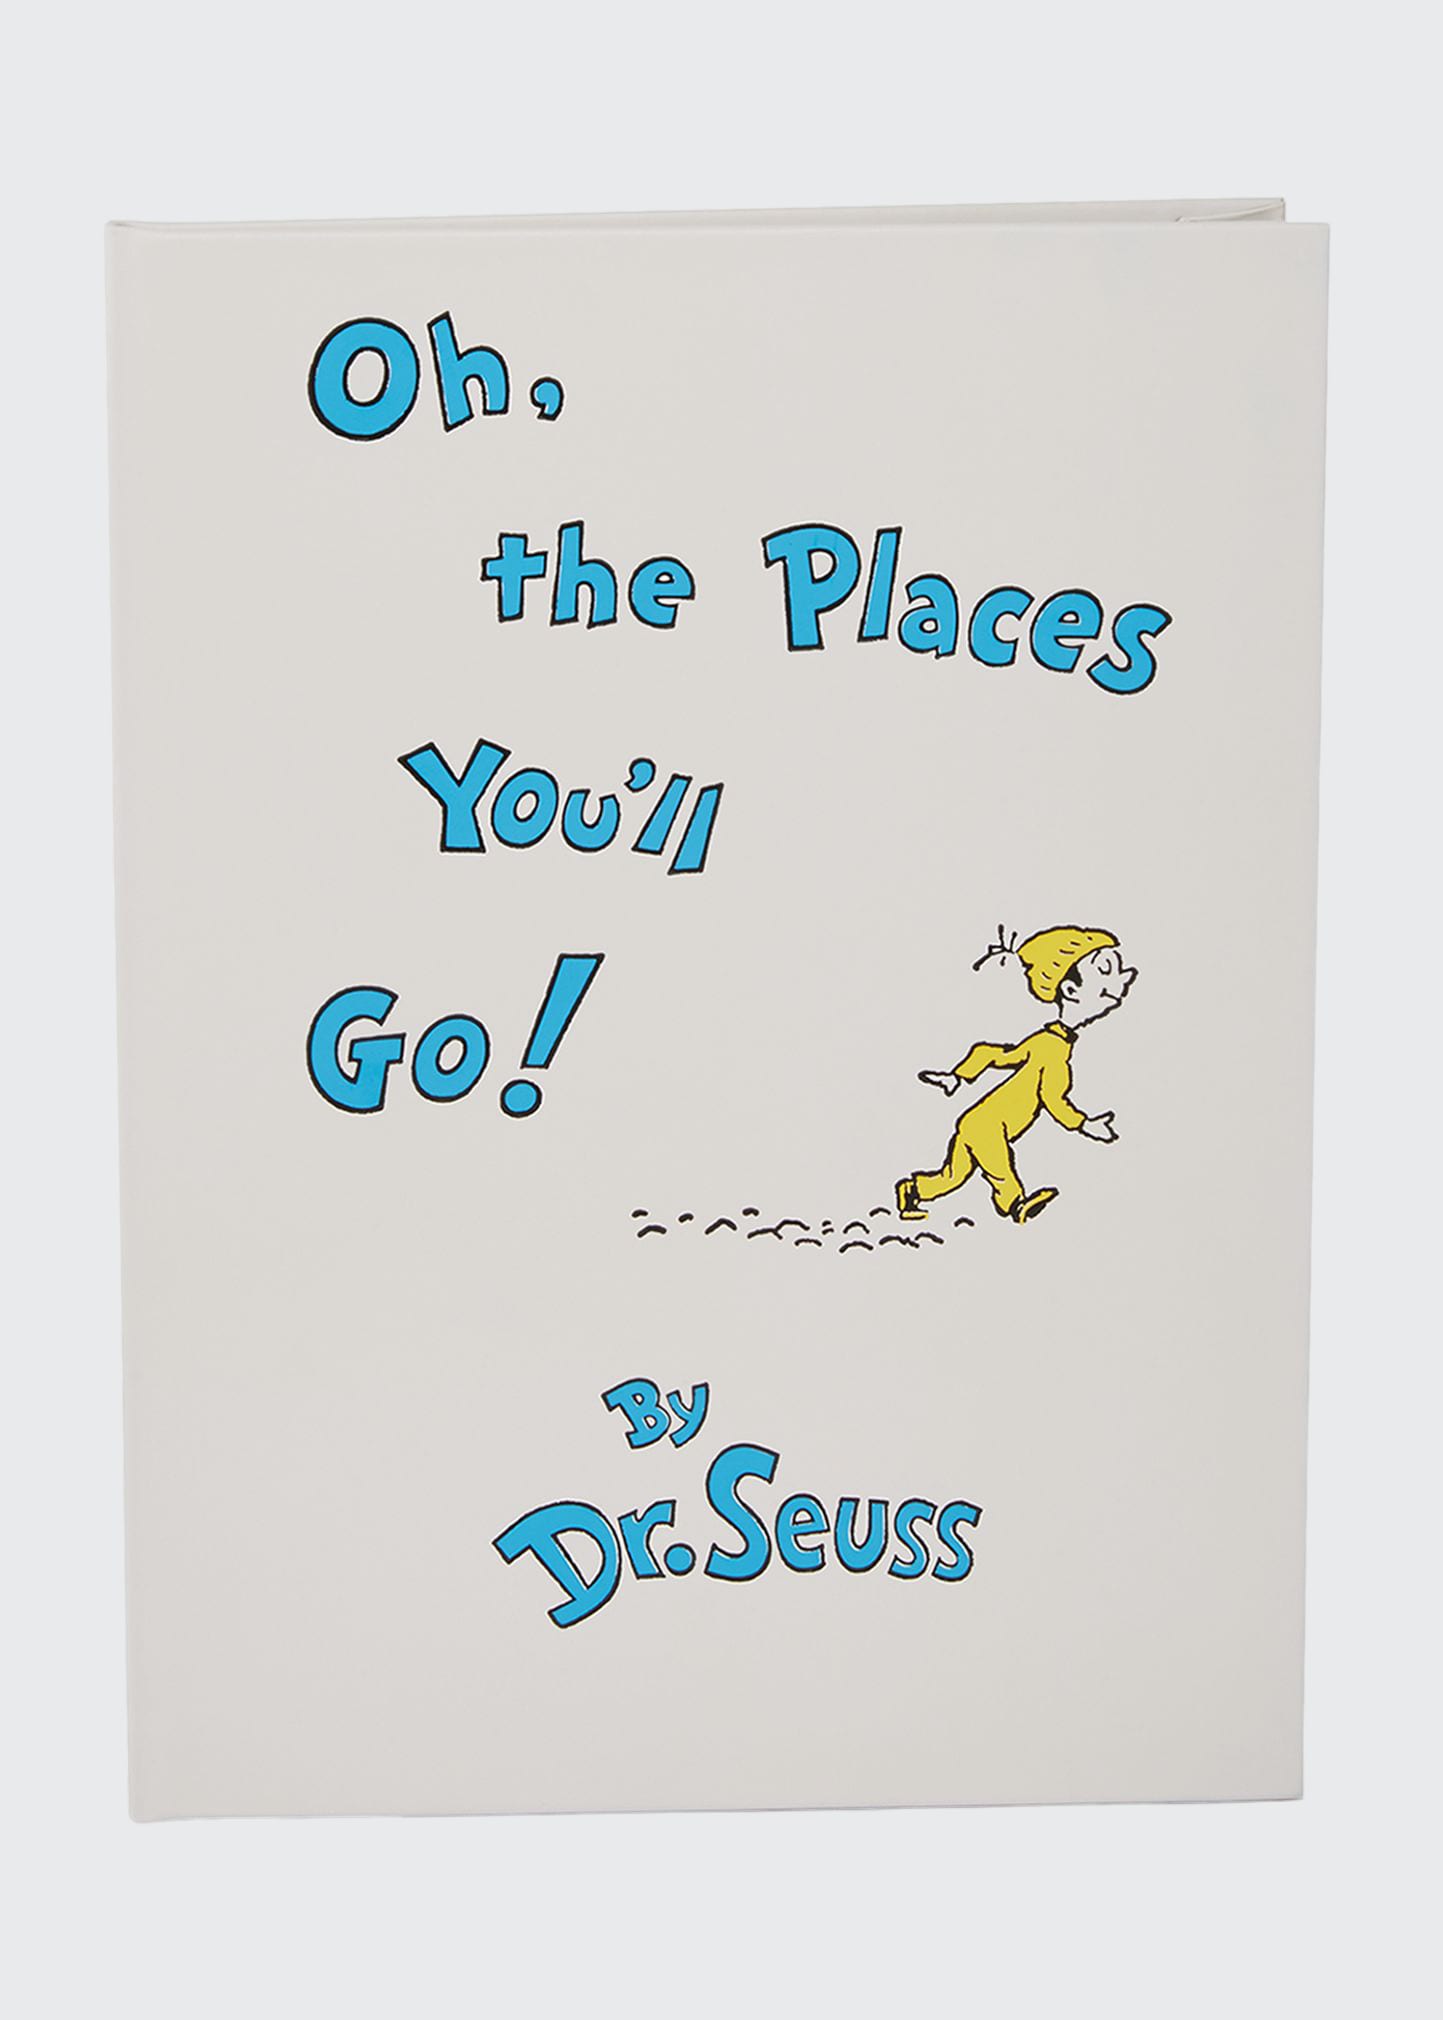 Oh the Places You'll Go Book by Dr. Seuss